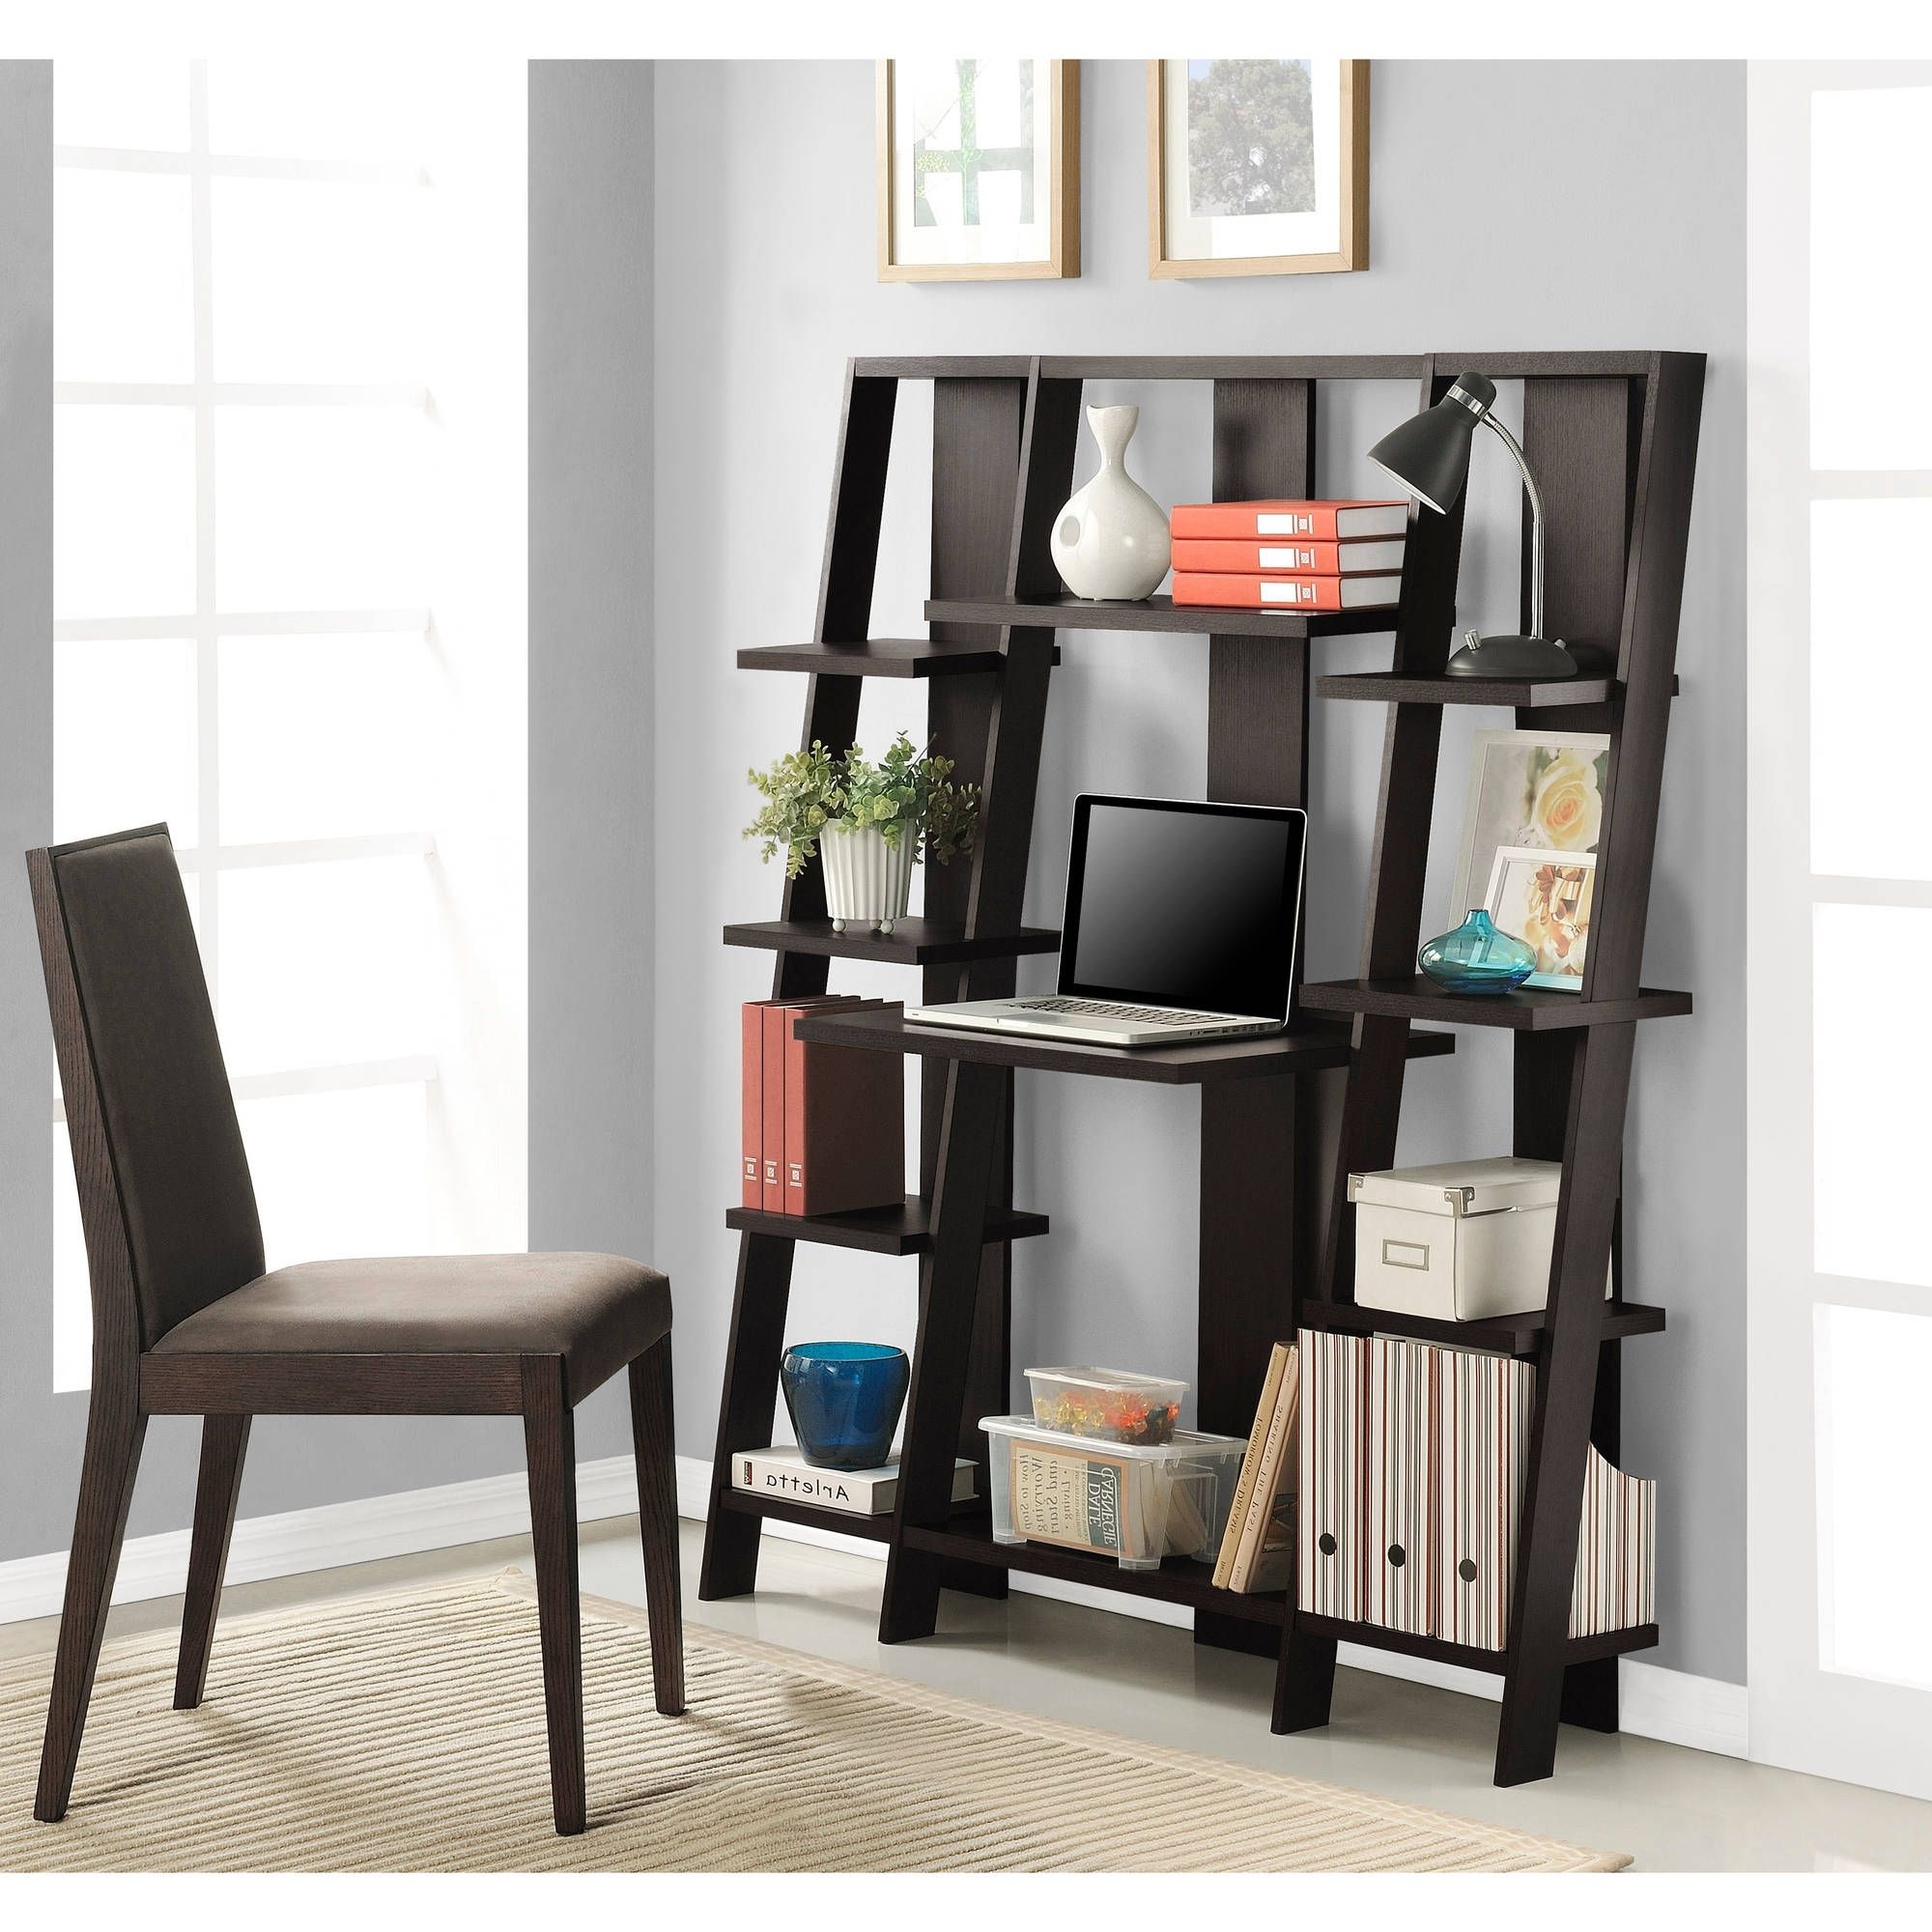 Ameriwood Home Gradient Ladder Desk/bookcase, Espresso – Walmart Intended For Latest Desk With Matching Bookcases (View 1 of 15)